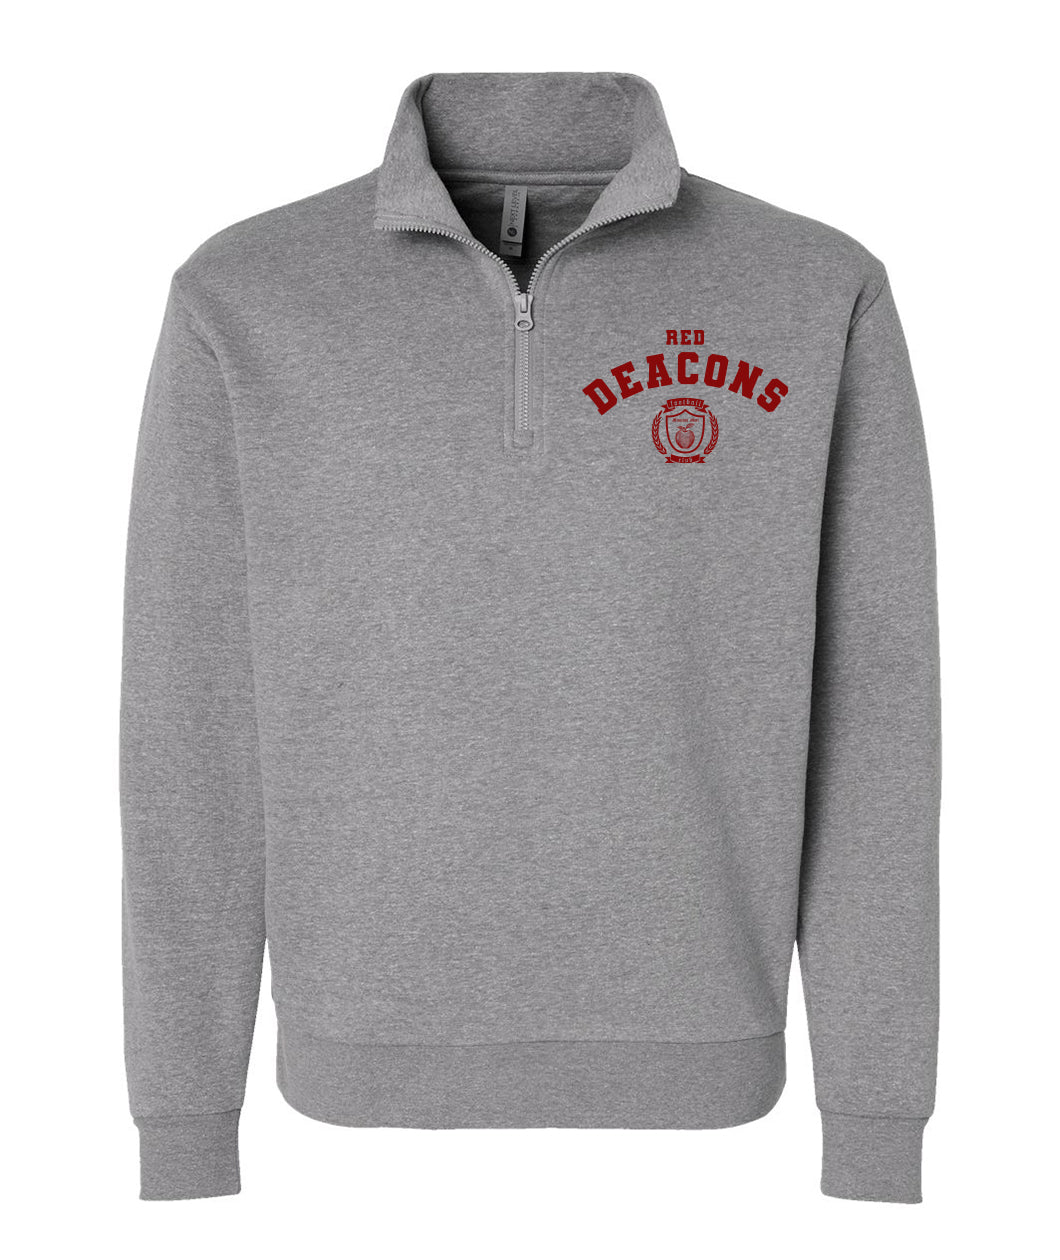 Heather Grey Sweatshirt with a quarter zip closure. There is a print on the left part of the wearer's chest that reads, 